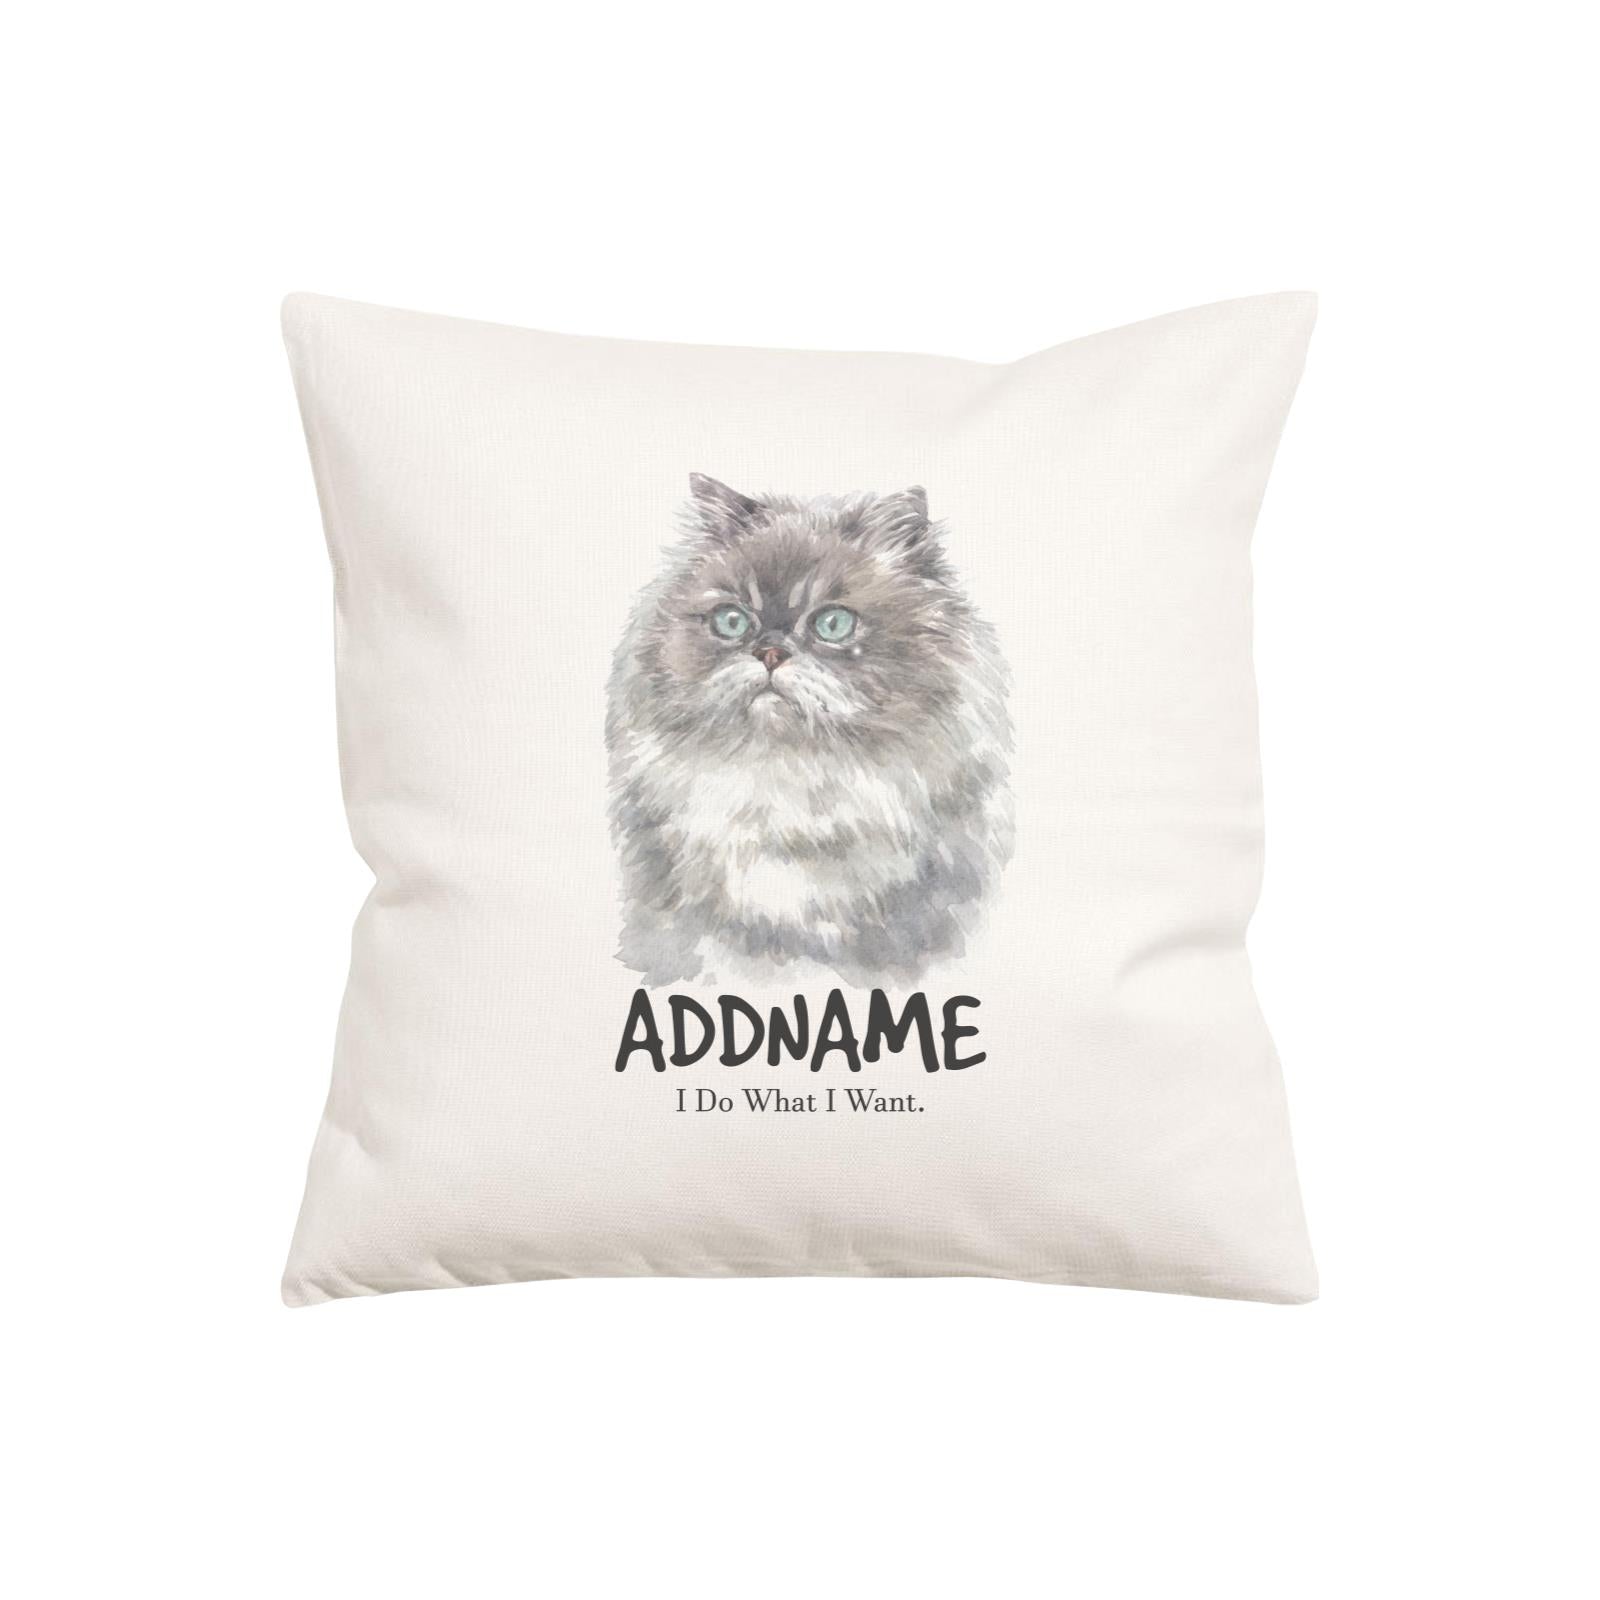 Watercolor Cat Series Himalayan I Do What I Want Addname Pillow Cushion